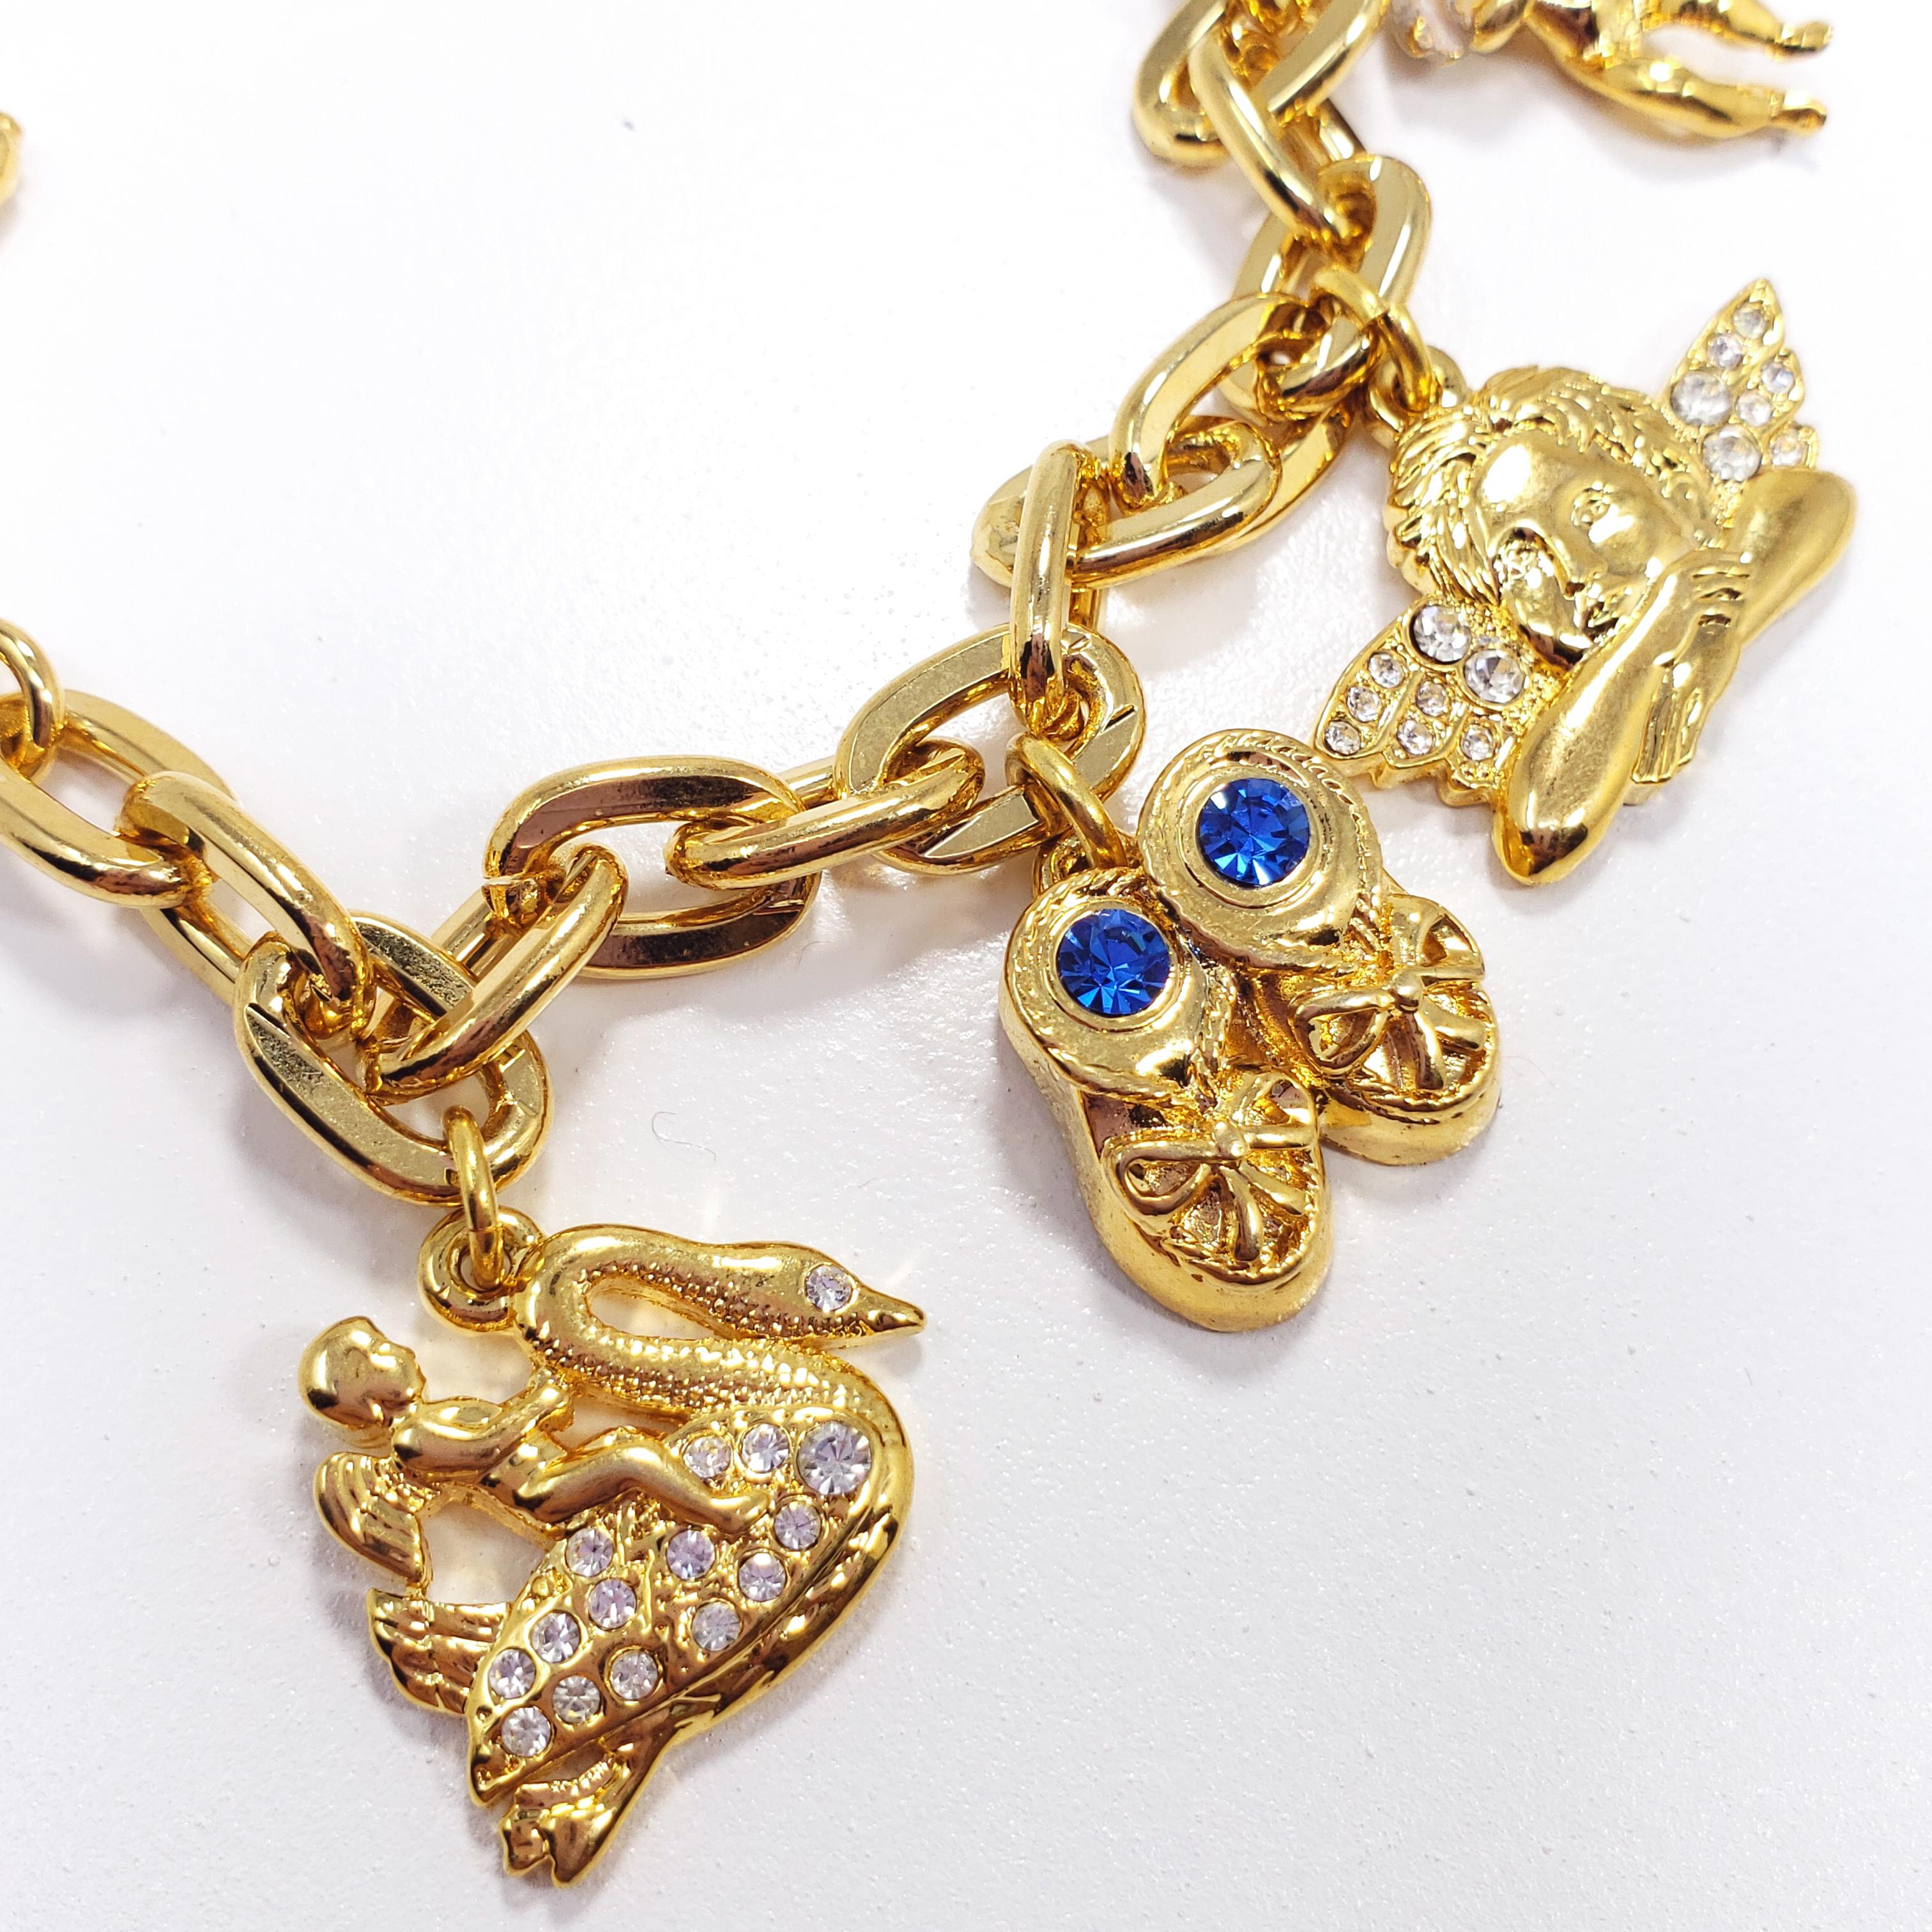 A gold-plated chain bracelet with five charms - a pair of lucky dice, cherub, an angel, a pair of shoes, and a swan. Accented with crystals and enamel, fastened with a toggle clasp. By Kenneth Jay Lane.

Hallmarks: © KJL